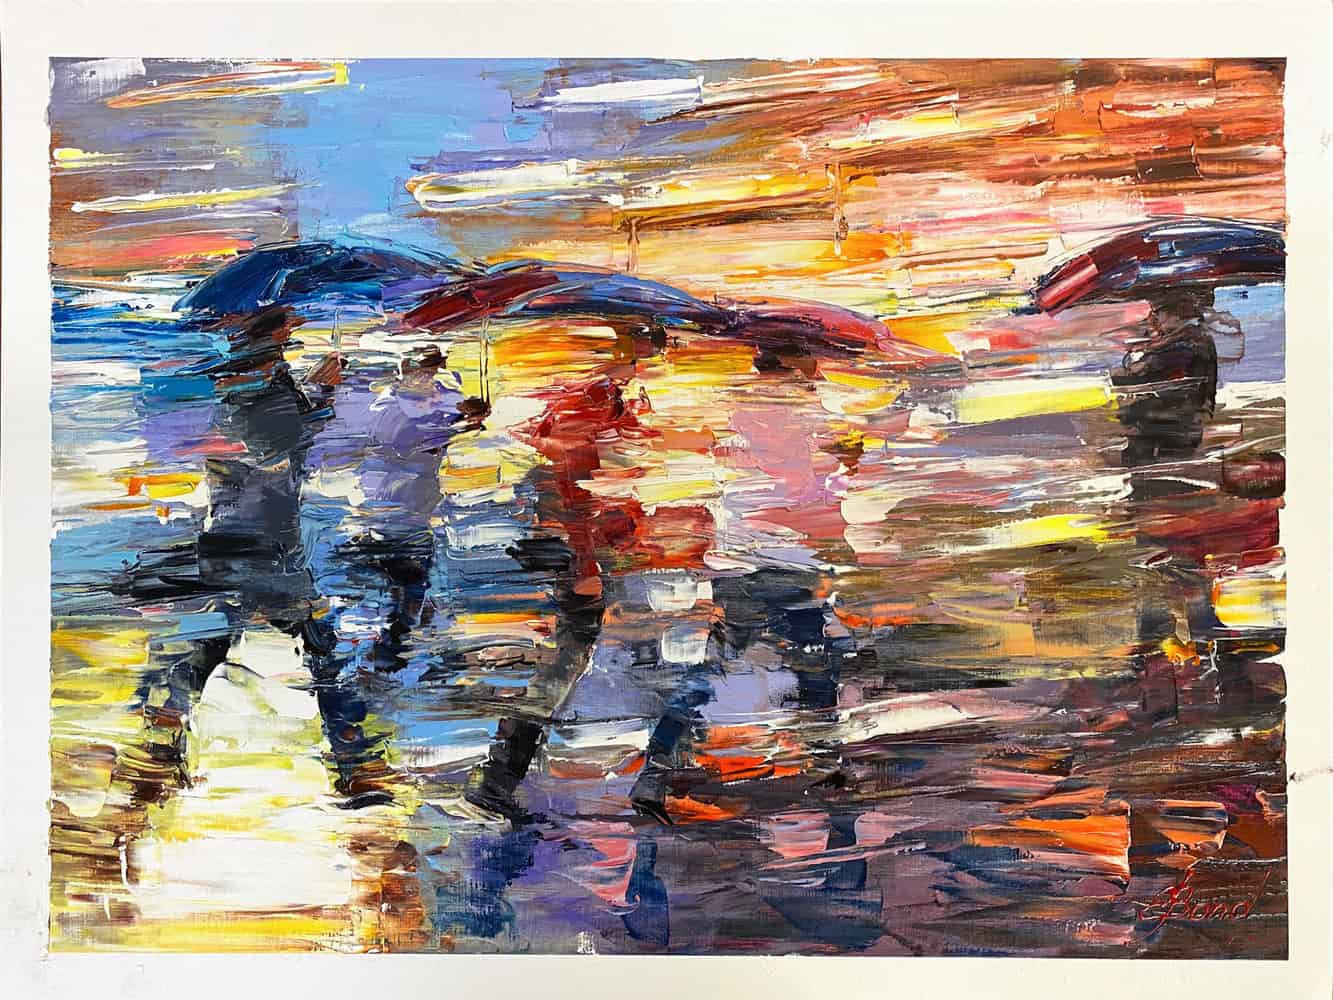 Buy a Print of People with Umbrellas called Into The Rain